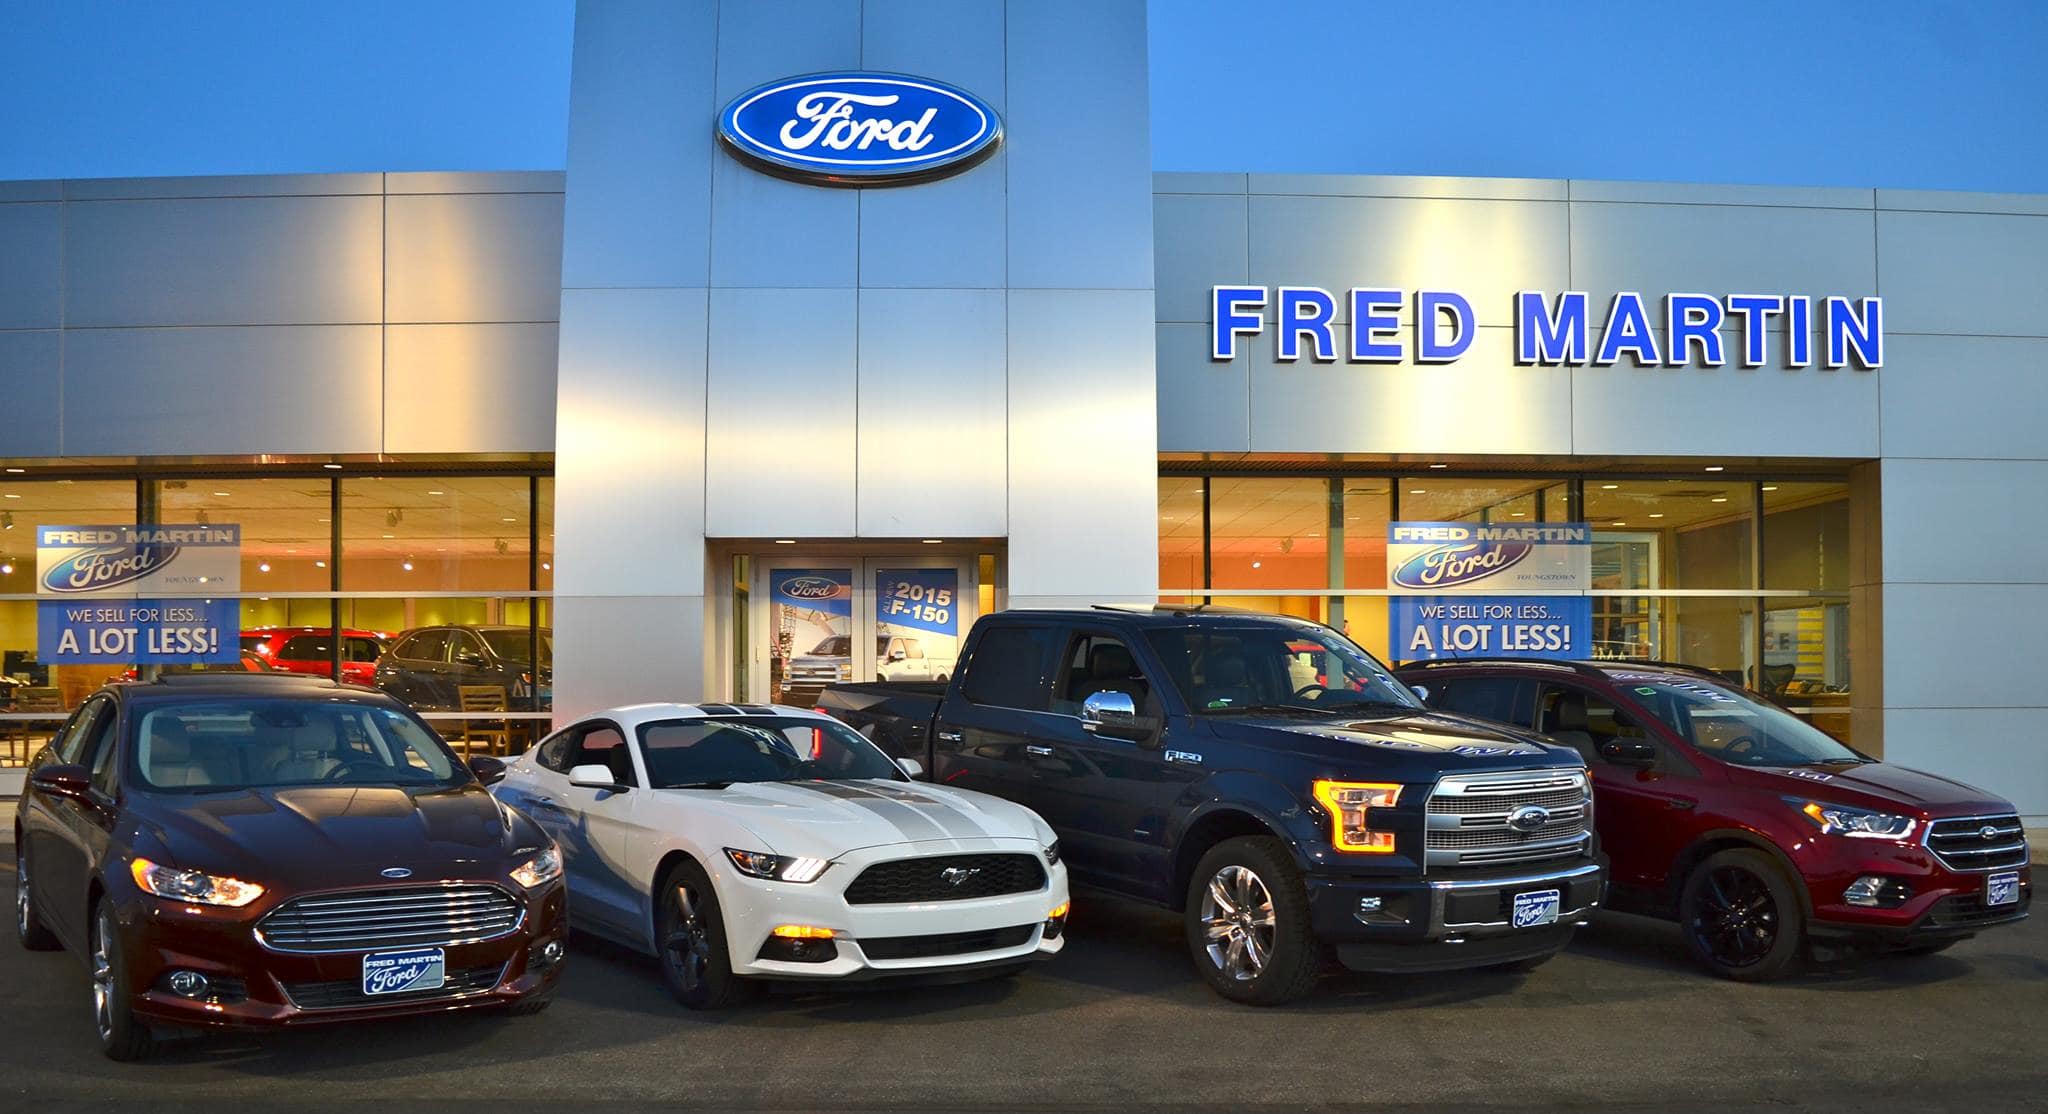 Fred Martin Ford Inc. | Youngstown Ohio New Ford & Used Car Dealership